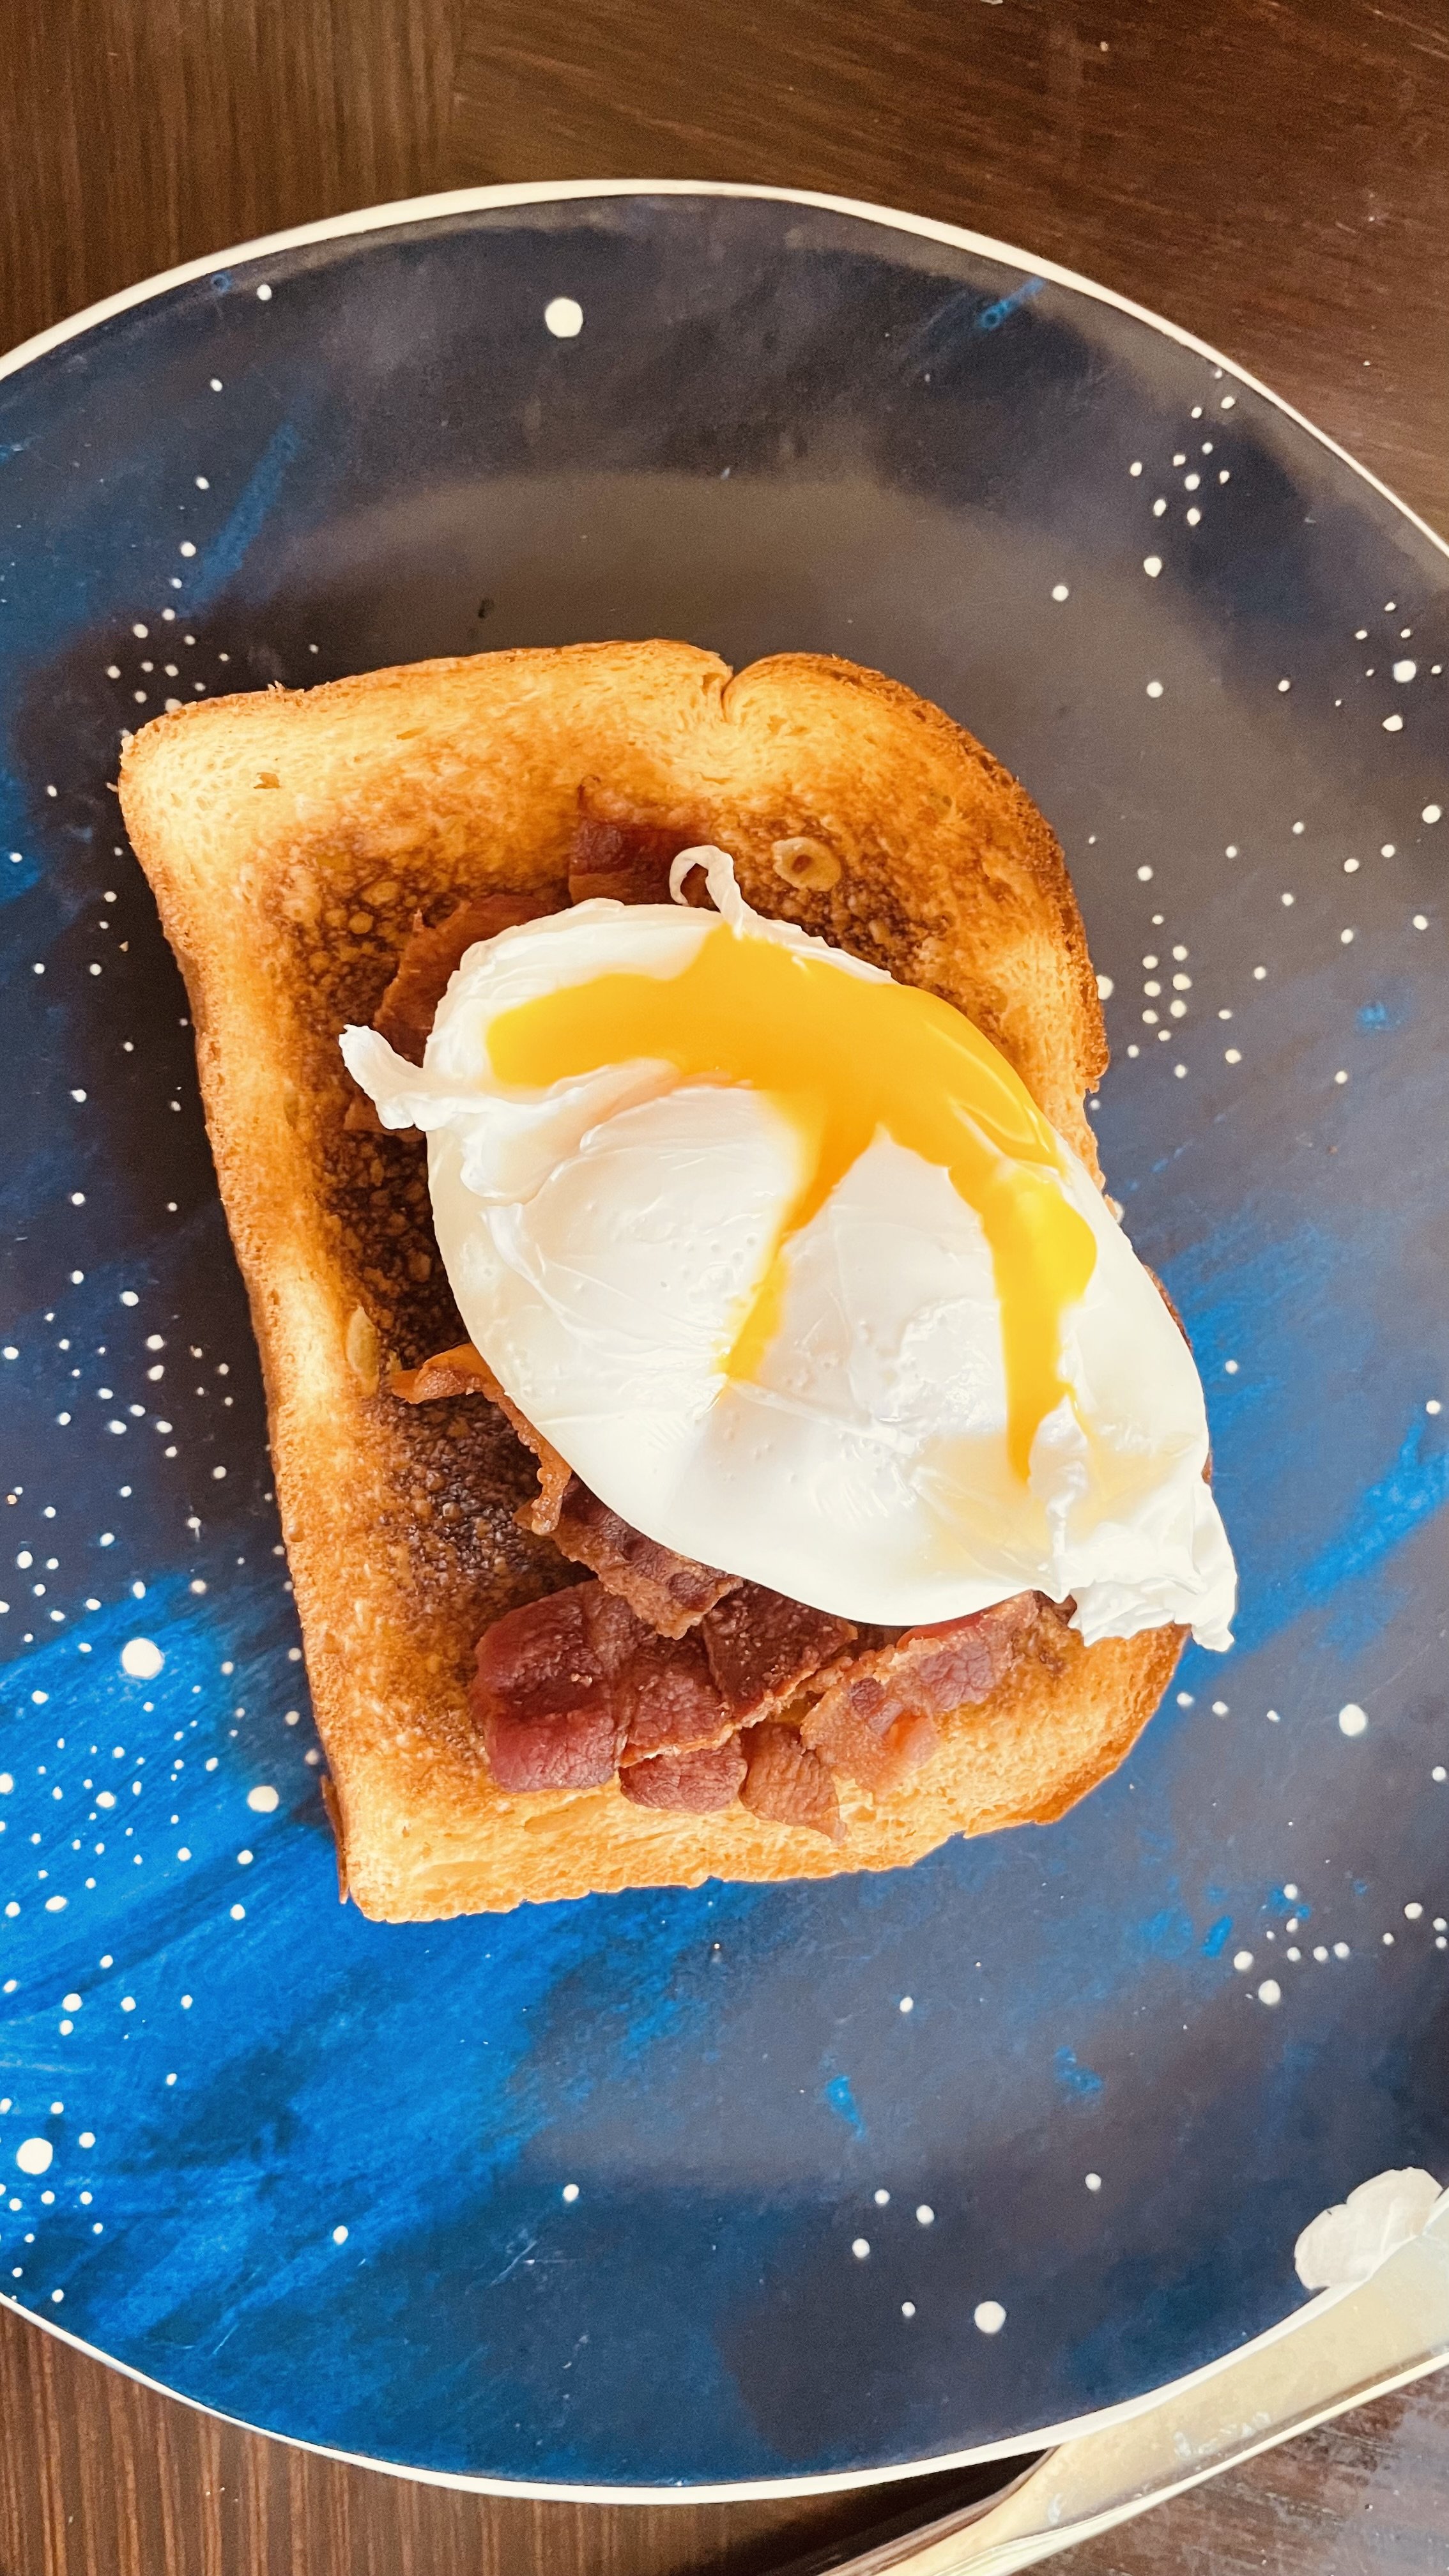 Store bought brioche with chopped bacon and a poached egg on top.